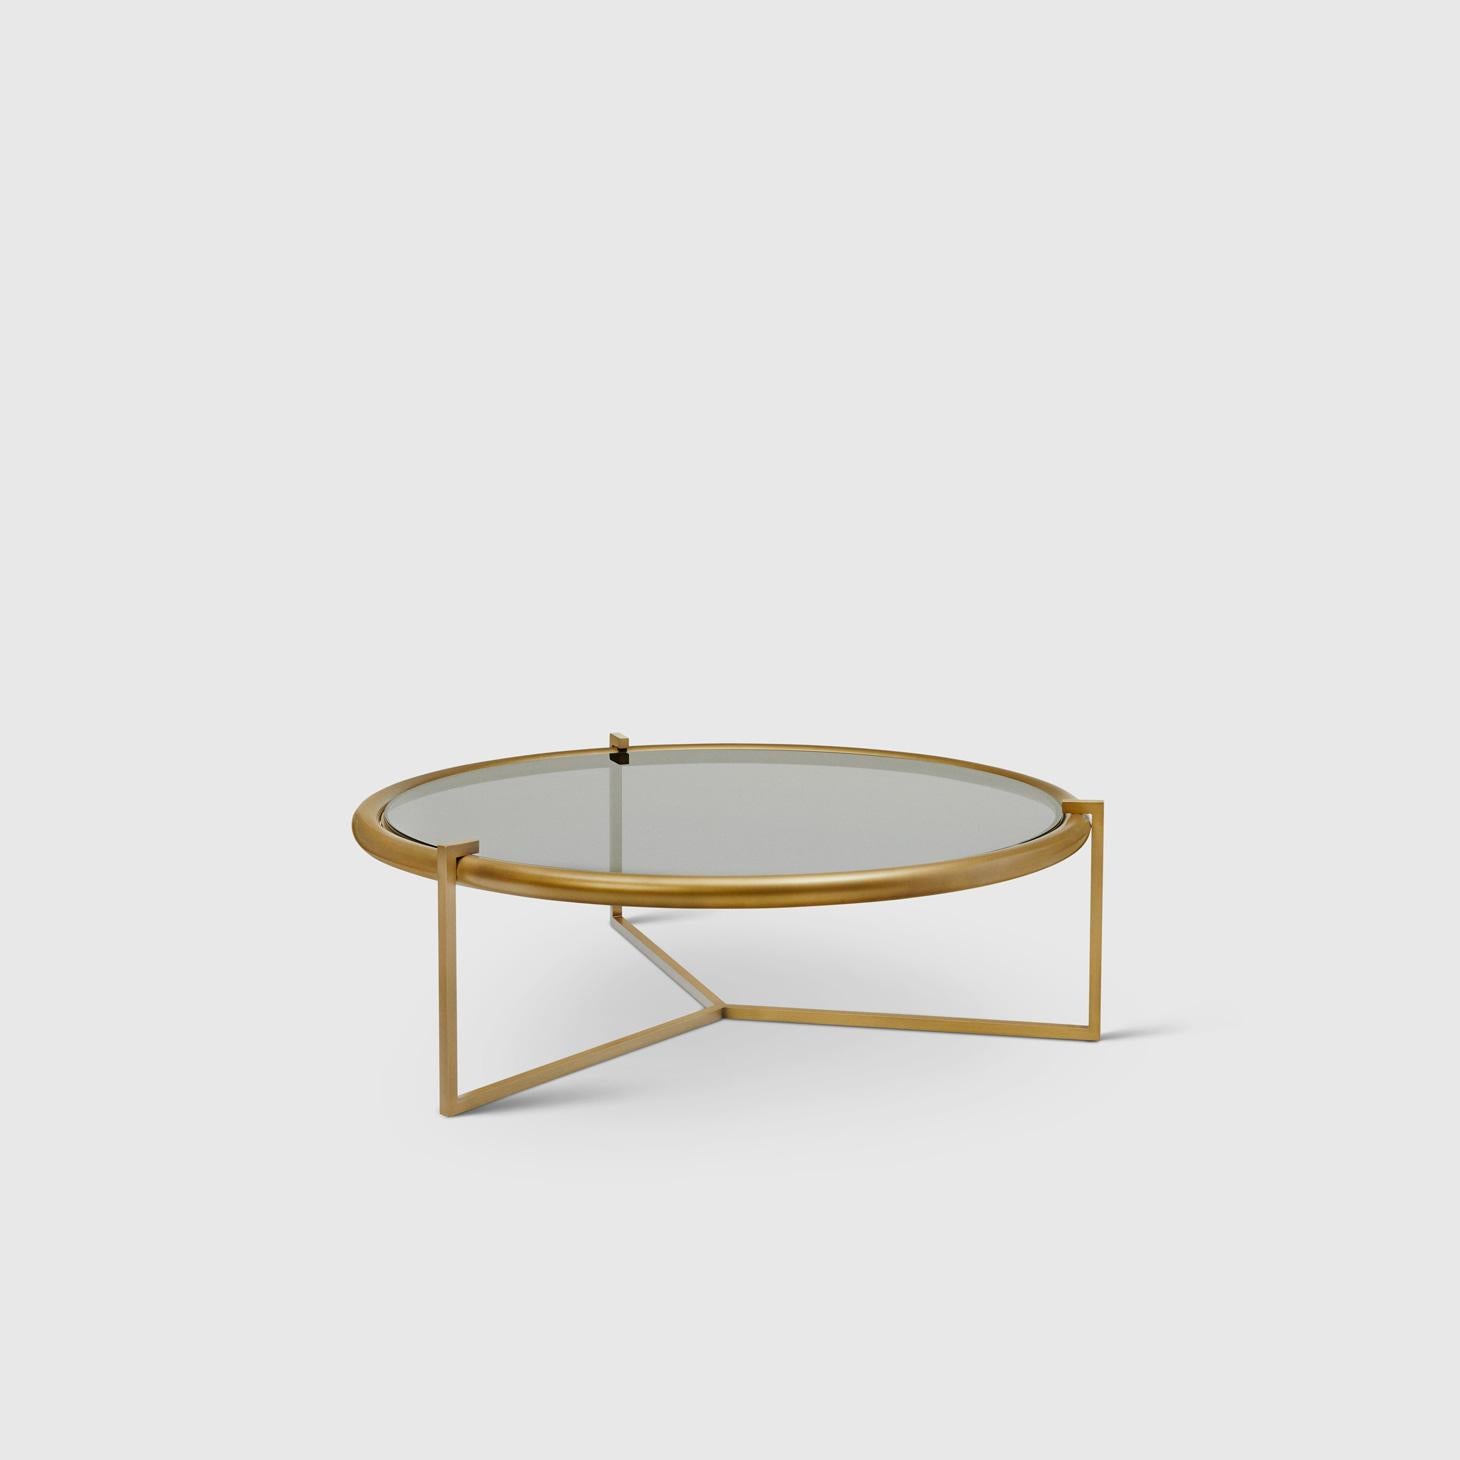 Osvaldo Tenorio’s Rua Tucumã coffee tables mirror the natural inspiration evident in all things Brazilian where the line between indoors and outdoors disappears. Crafted in Italy by master makers the tables are available in burnished bronze or